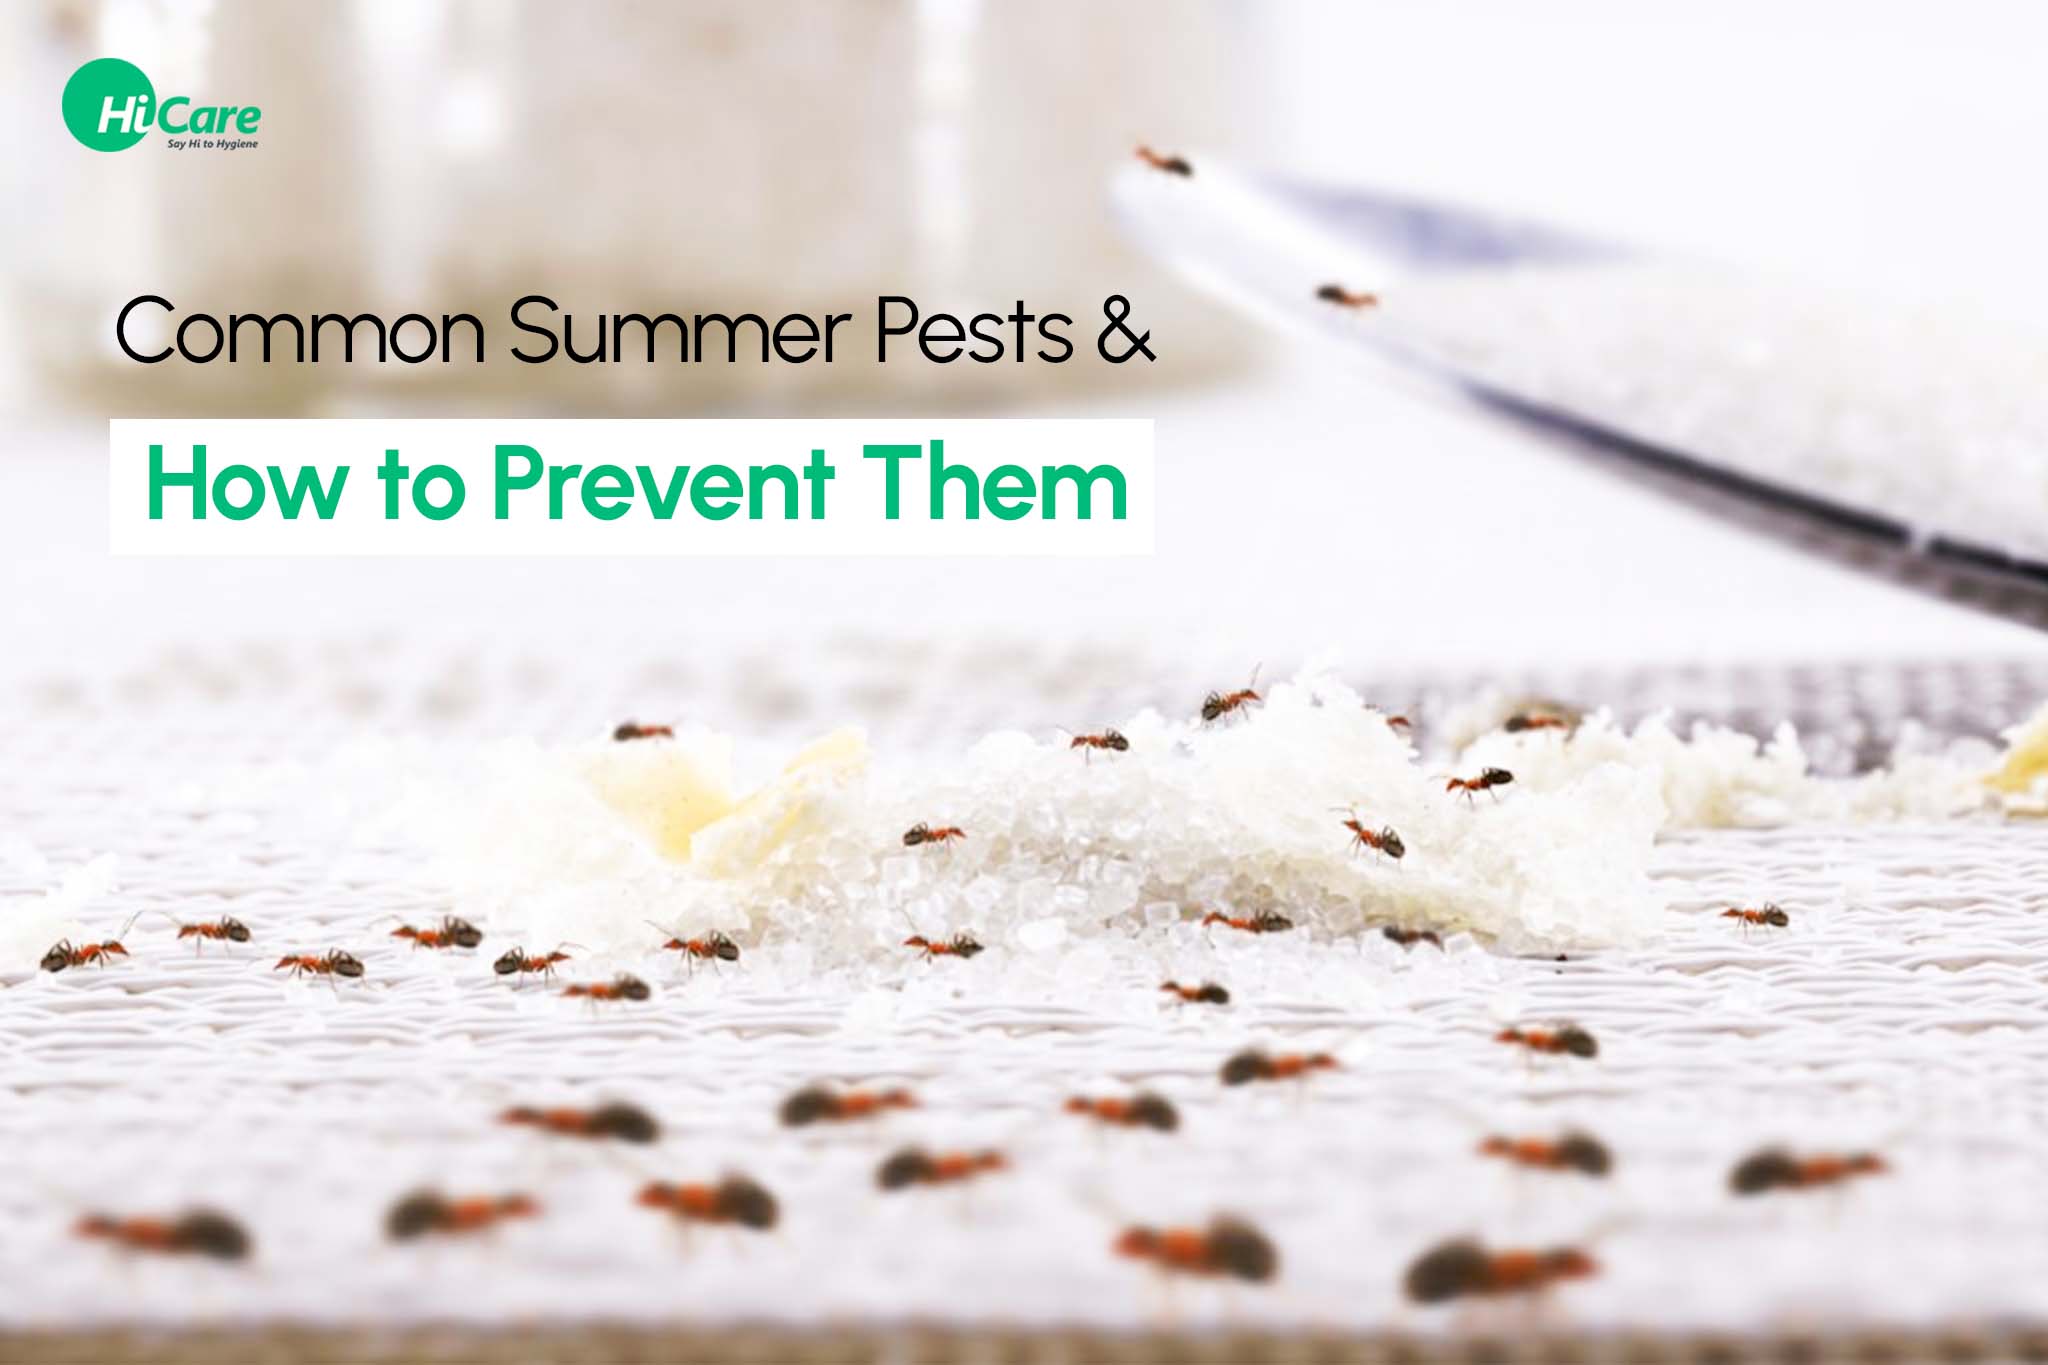 Common Summer Pests and How to Prevent Them